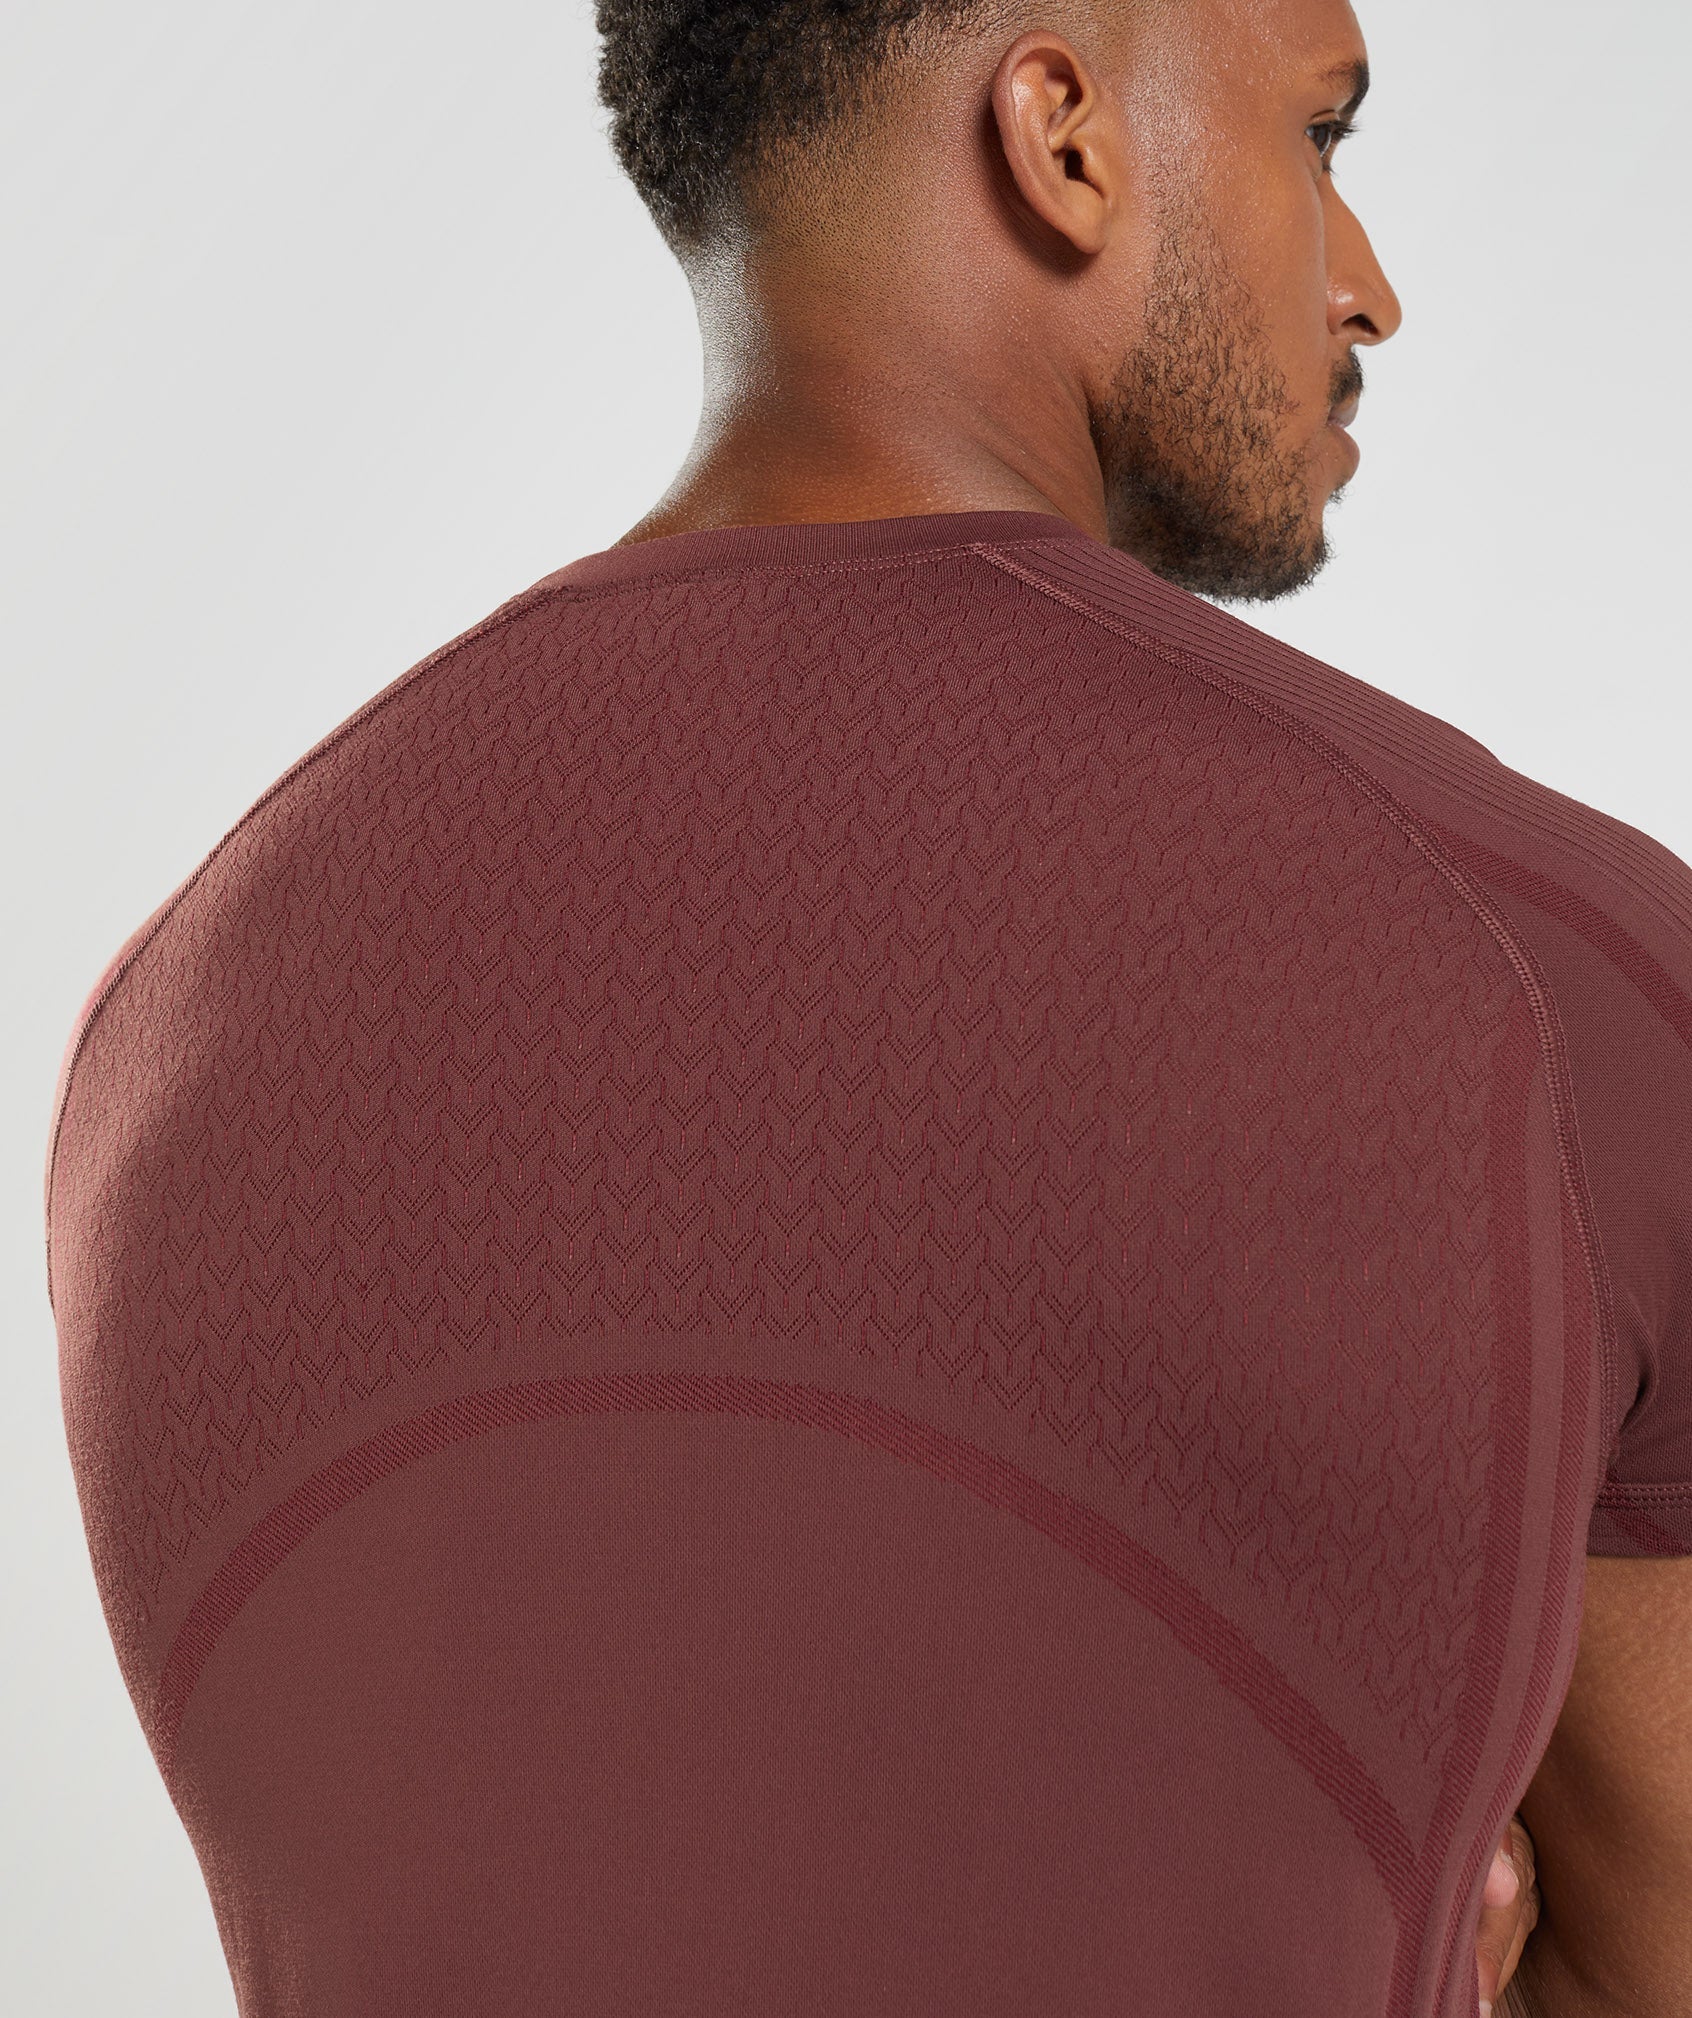 315 Seamless T-Shirt in Cherry Brown - view 6